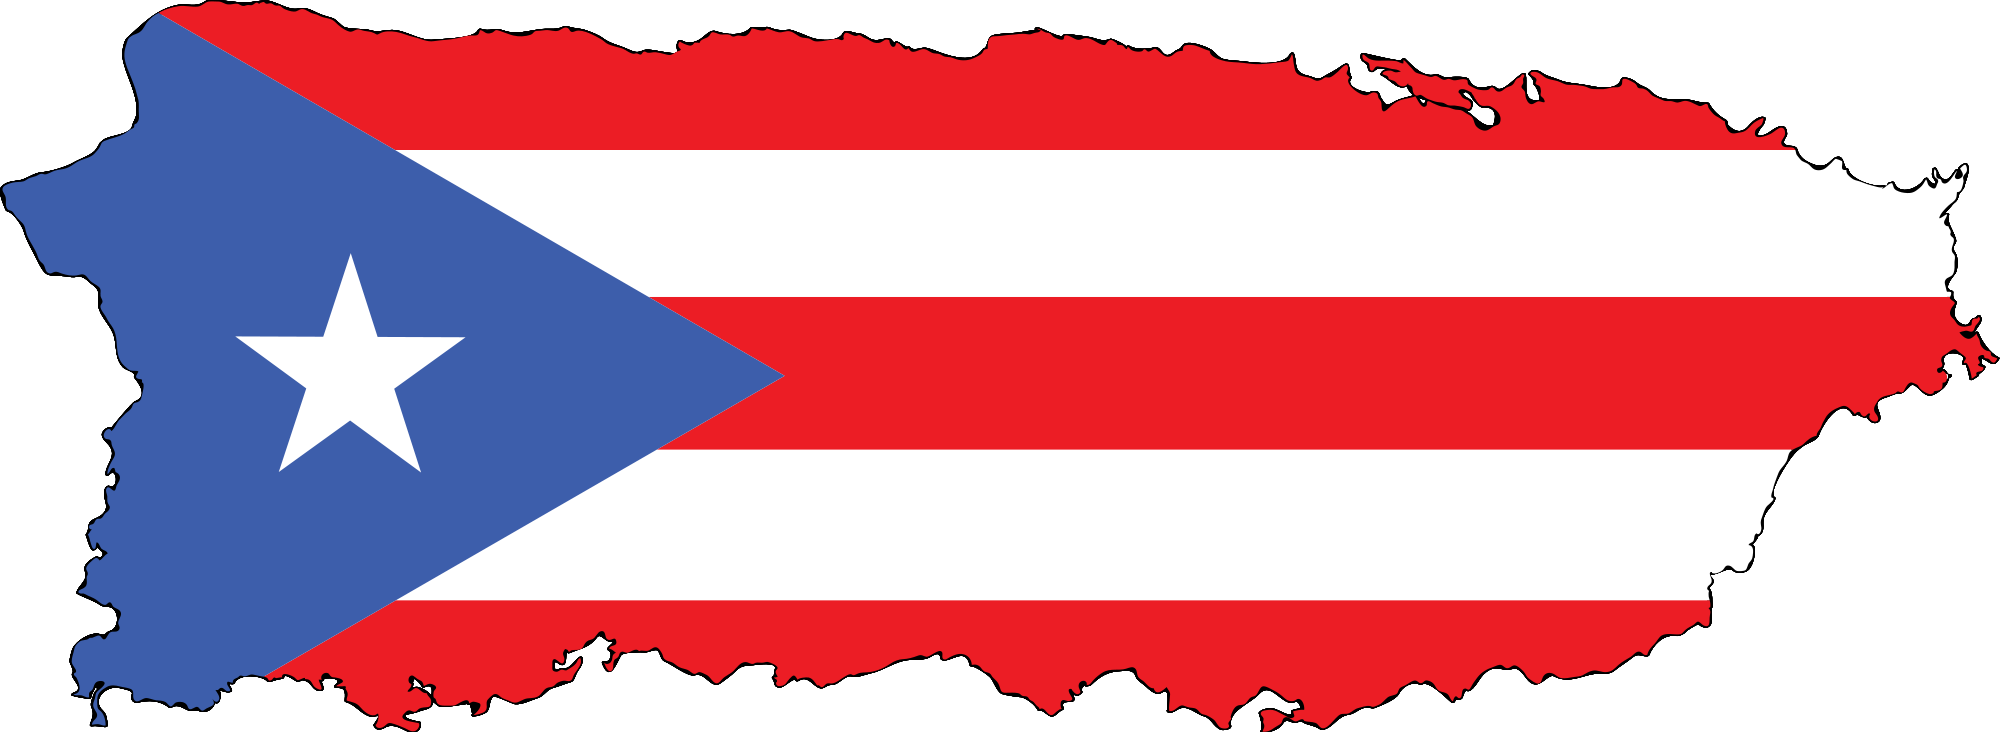 free clipart map of puerto rico - photo #41